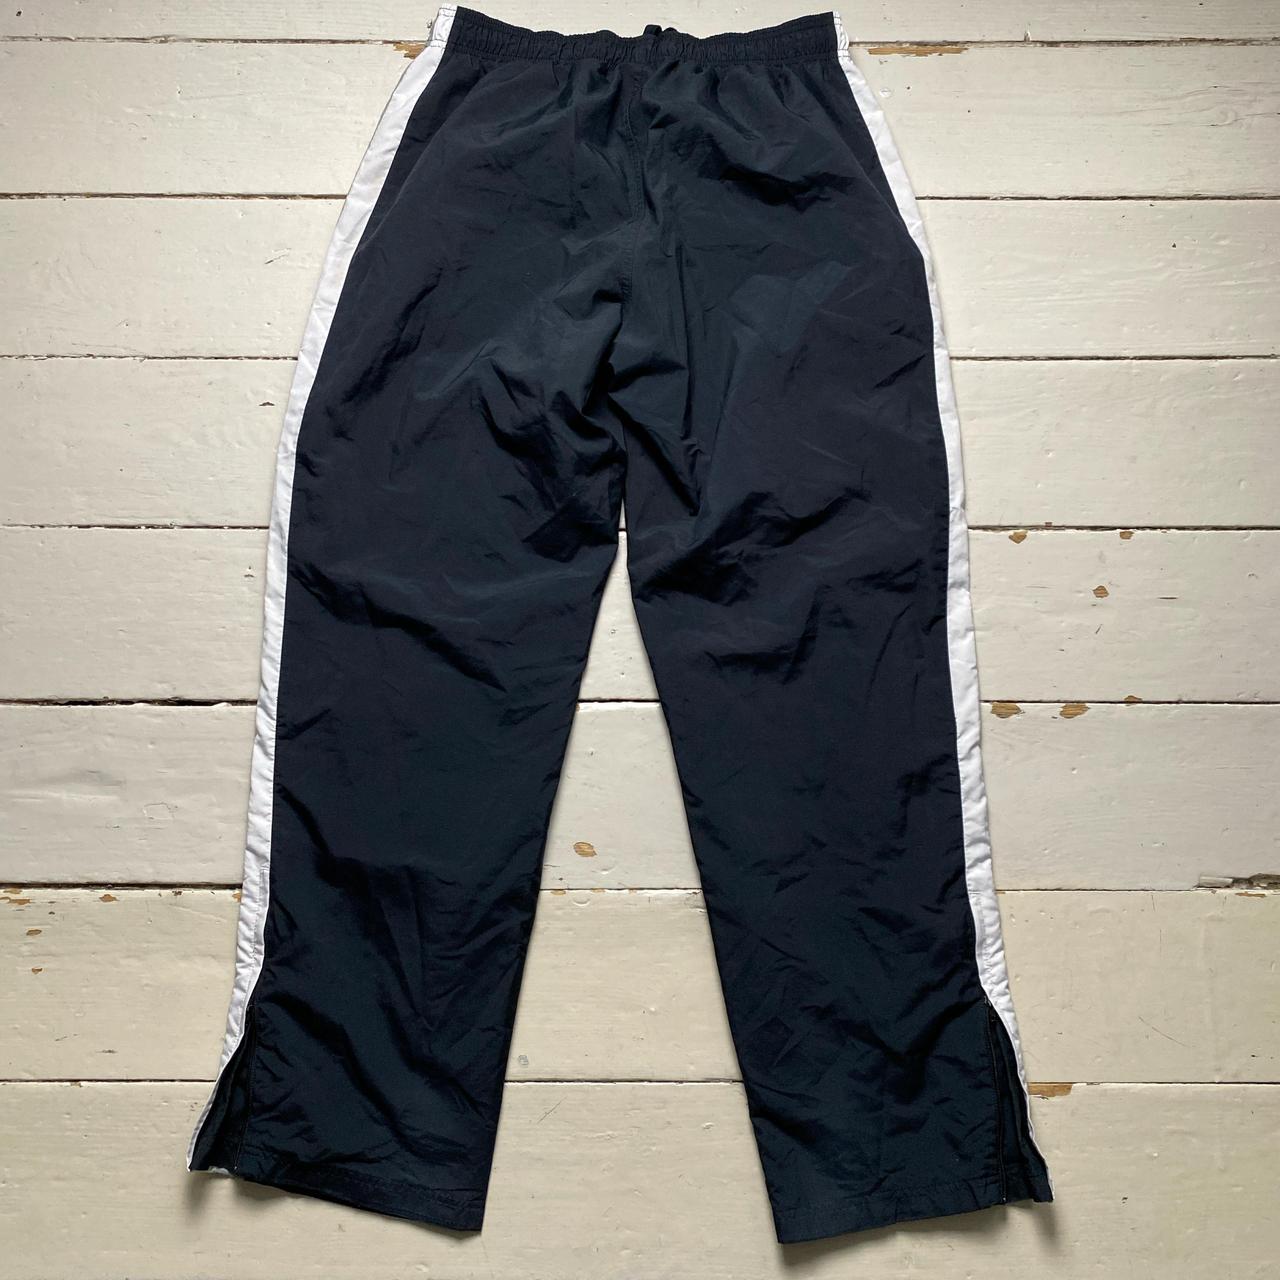 Nike Athletic Department Swoosh Vintage Black Grey and White Strip Shell Track Pant Baggy Bottoms